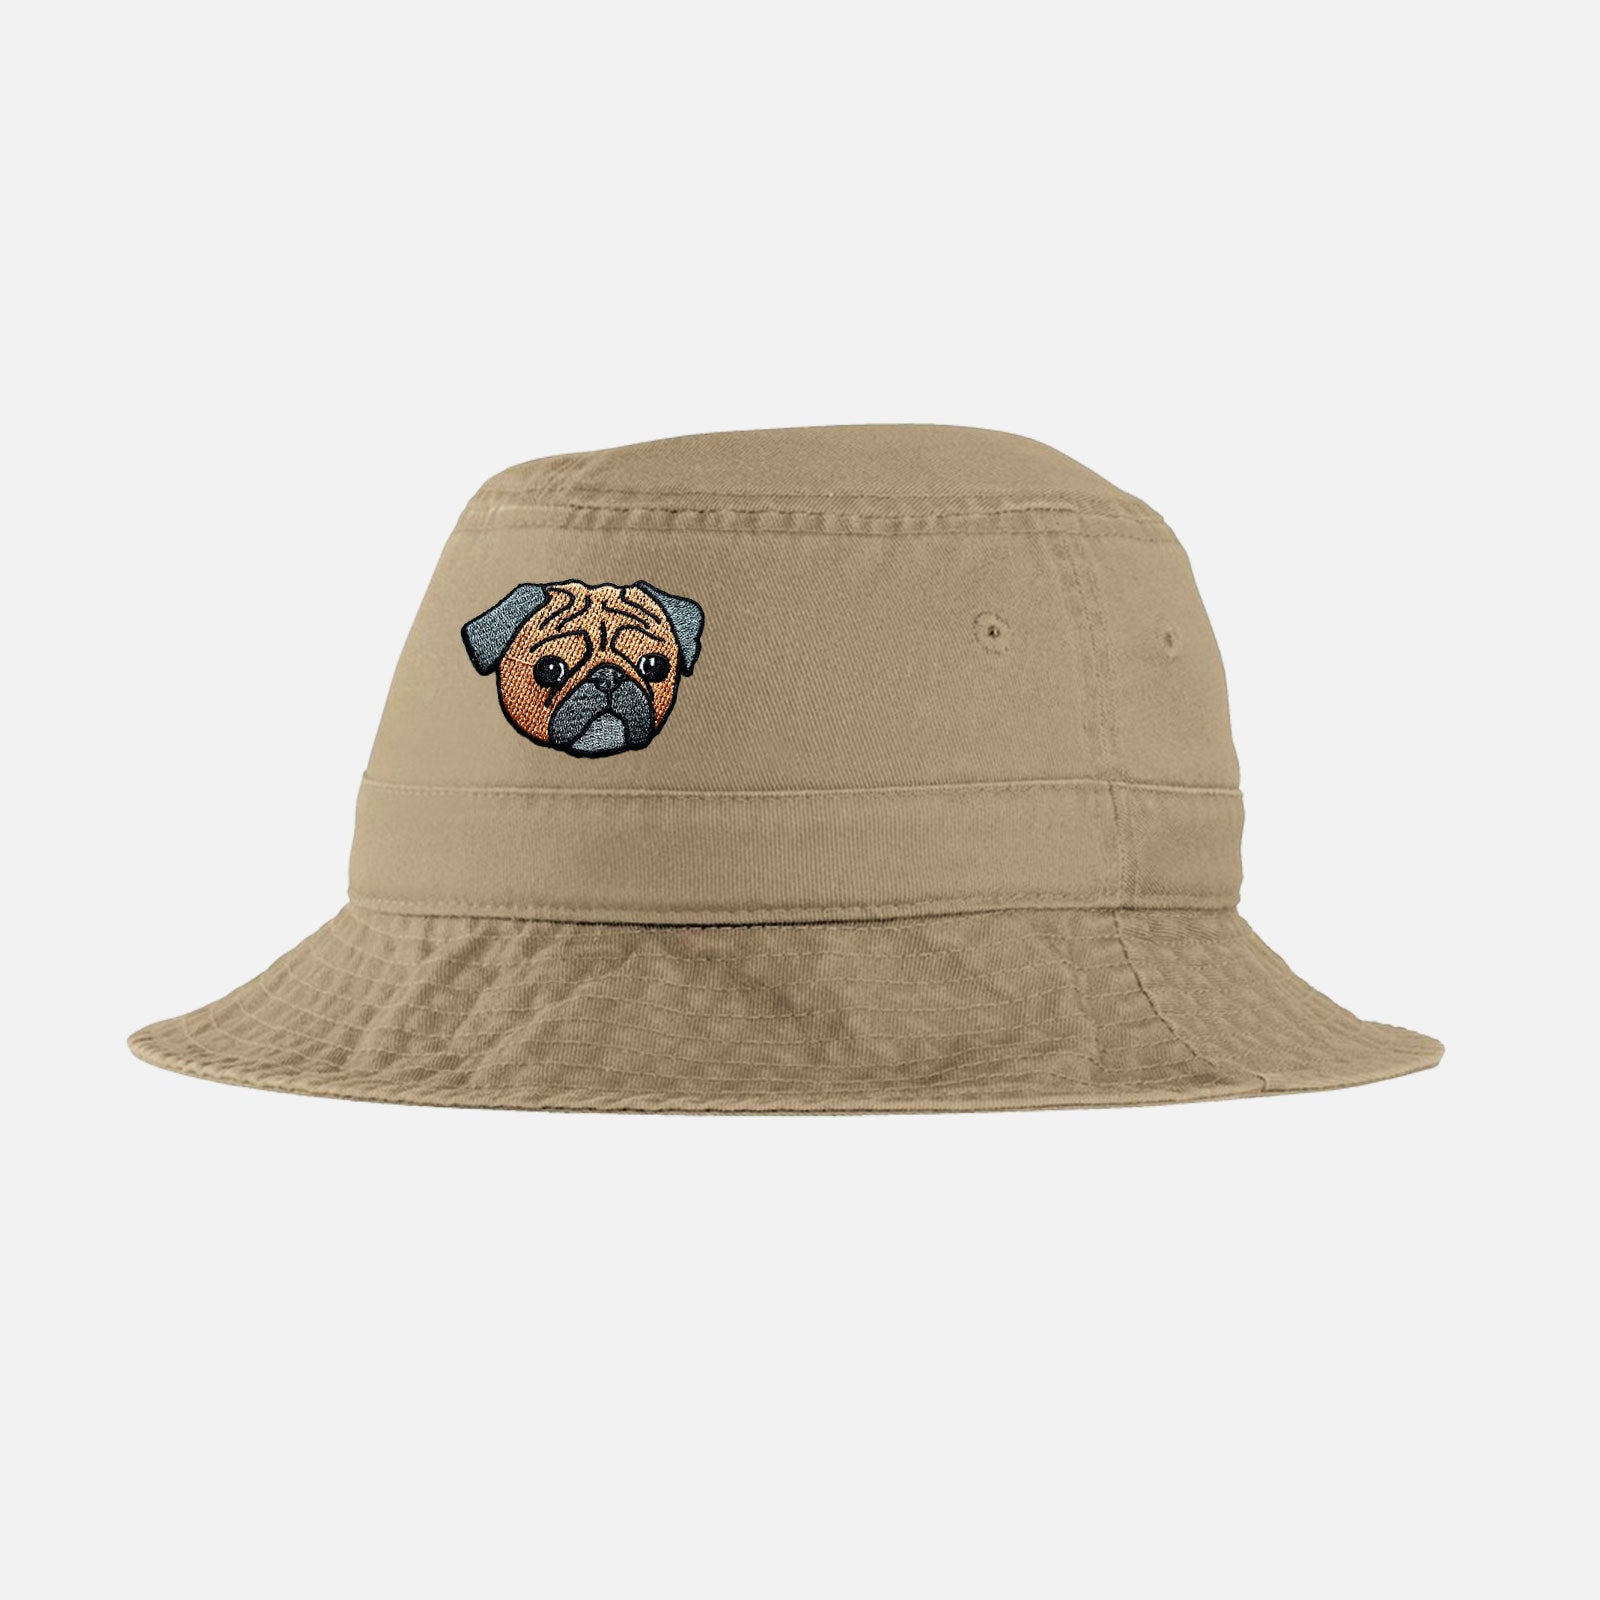 Khaki custom bucket hat with your dog, cat or pet embroidered on it.